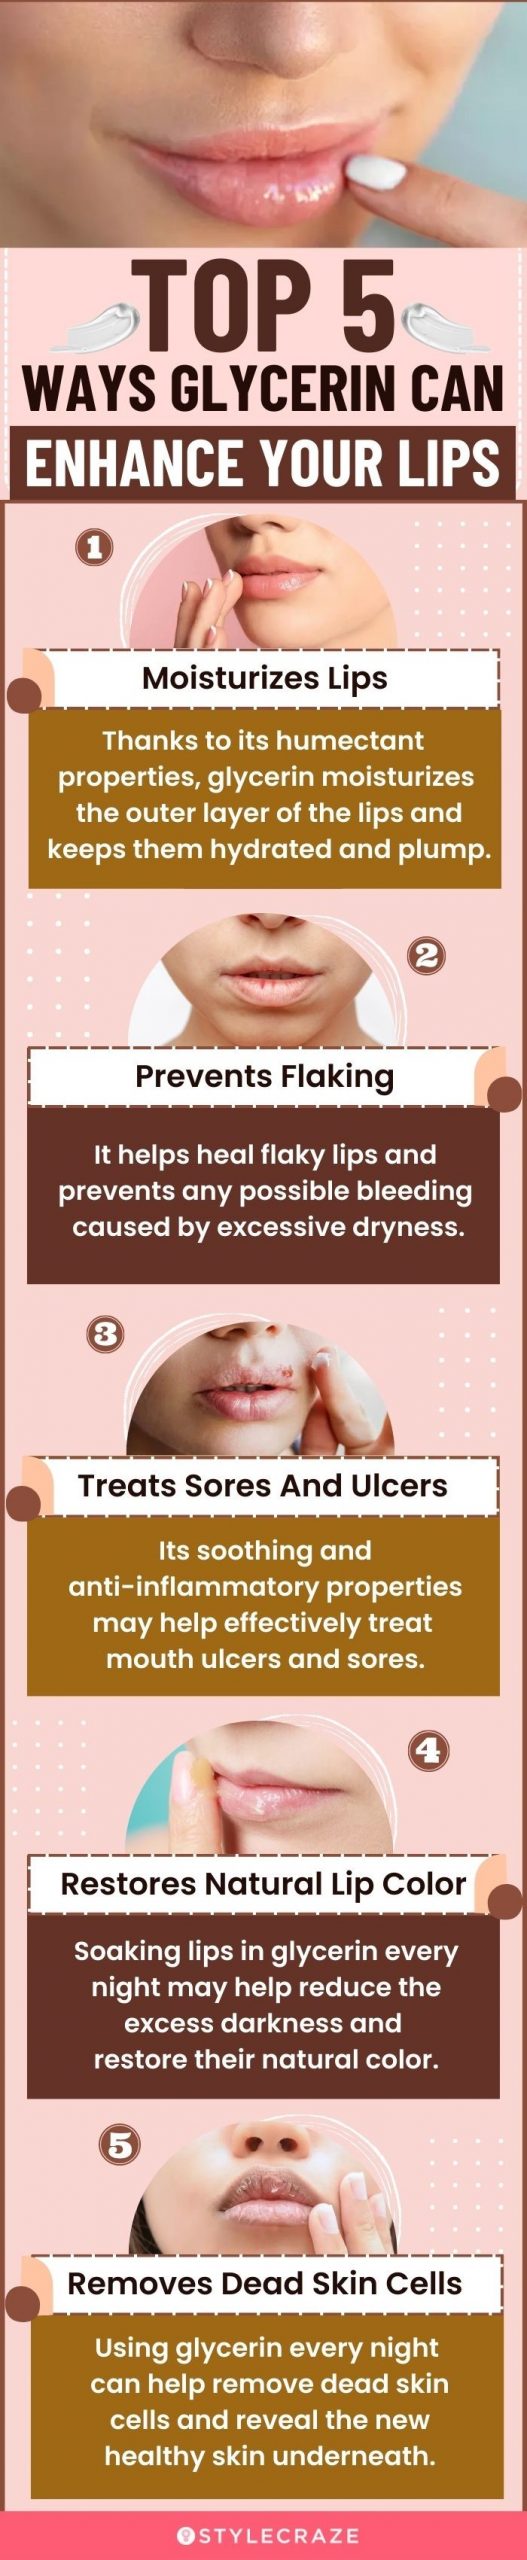 top 5 ways glycerin can enhance your lips (infographic)